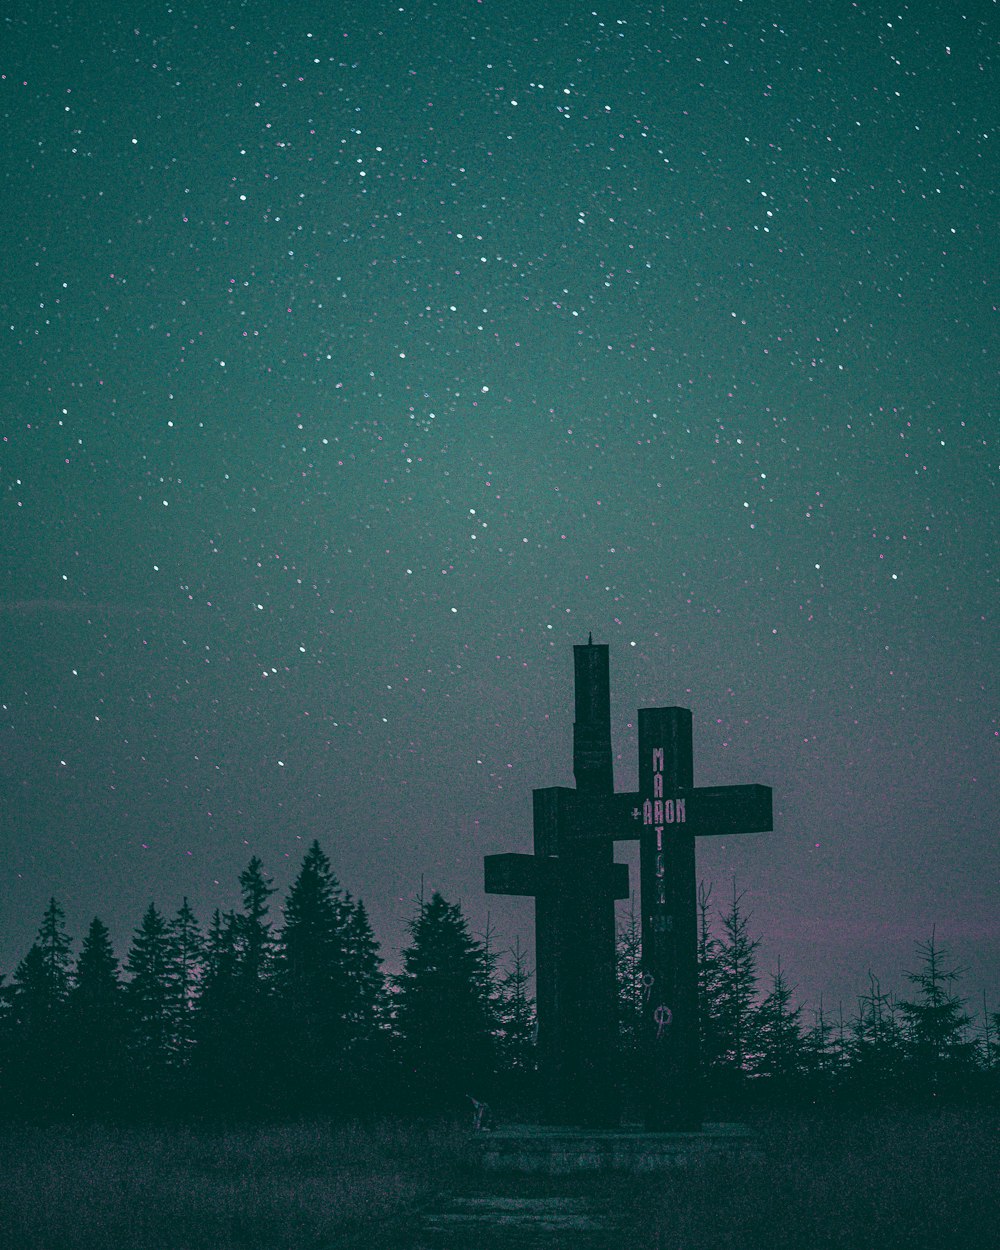 silhouette of cross on forest during night time